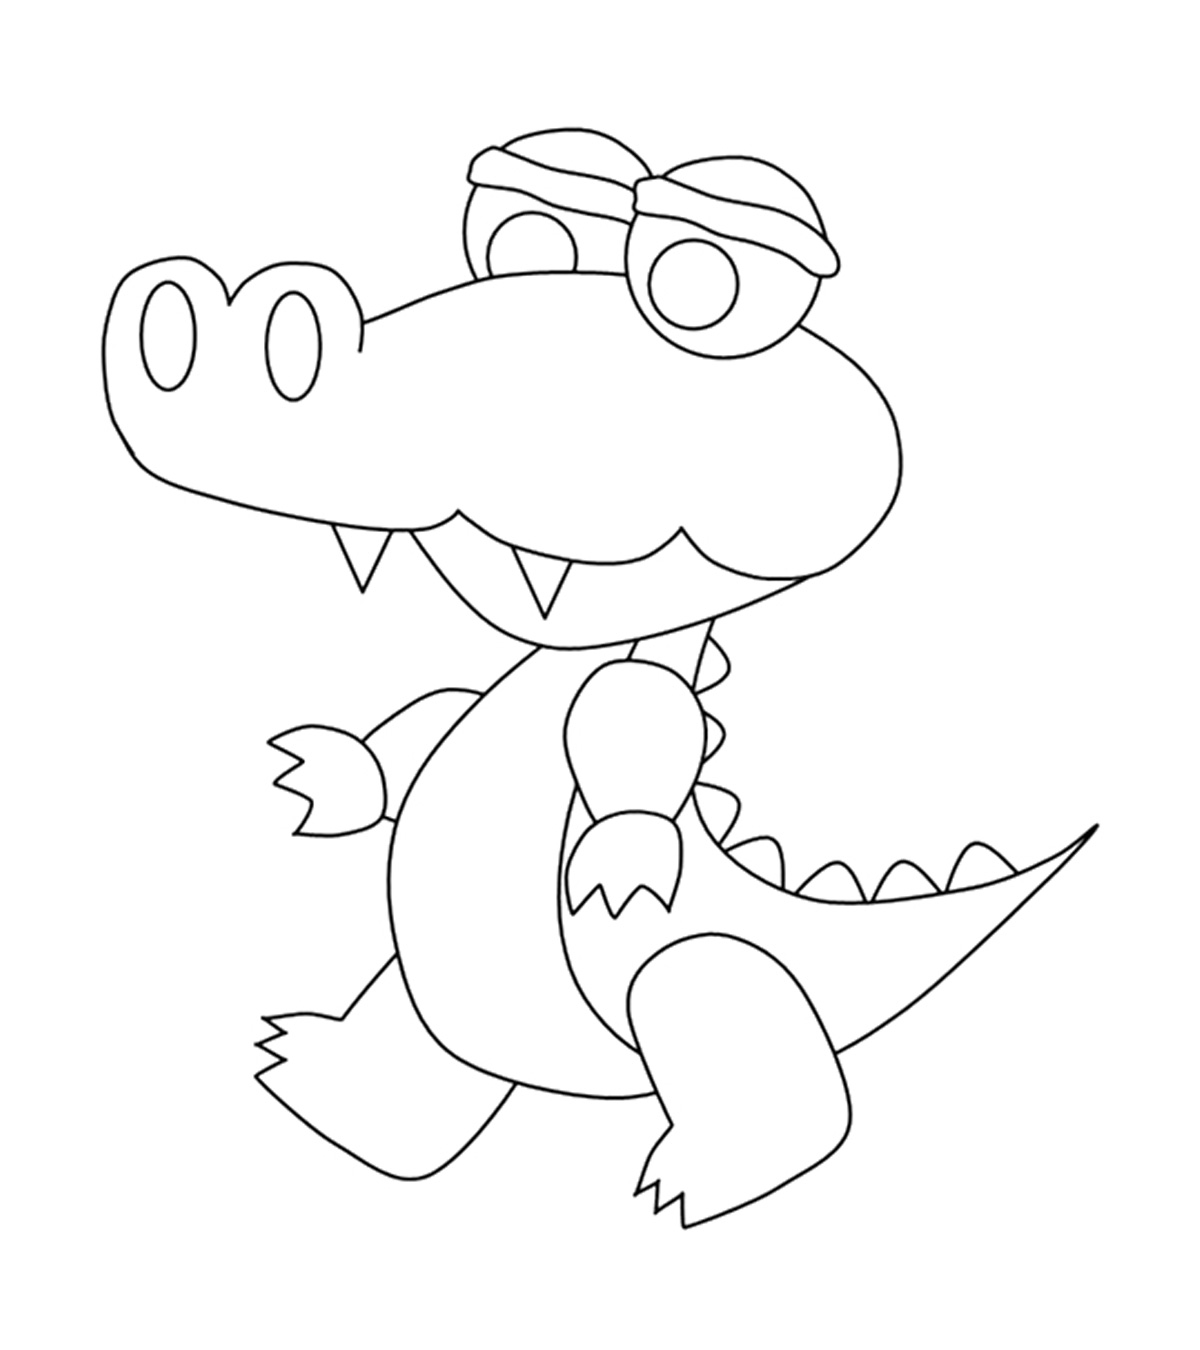 Top 10 Crocodile Coloring Pages For Your Toddler